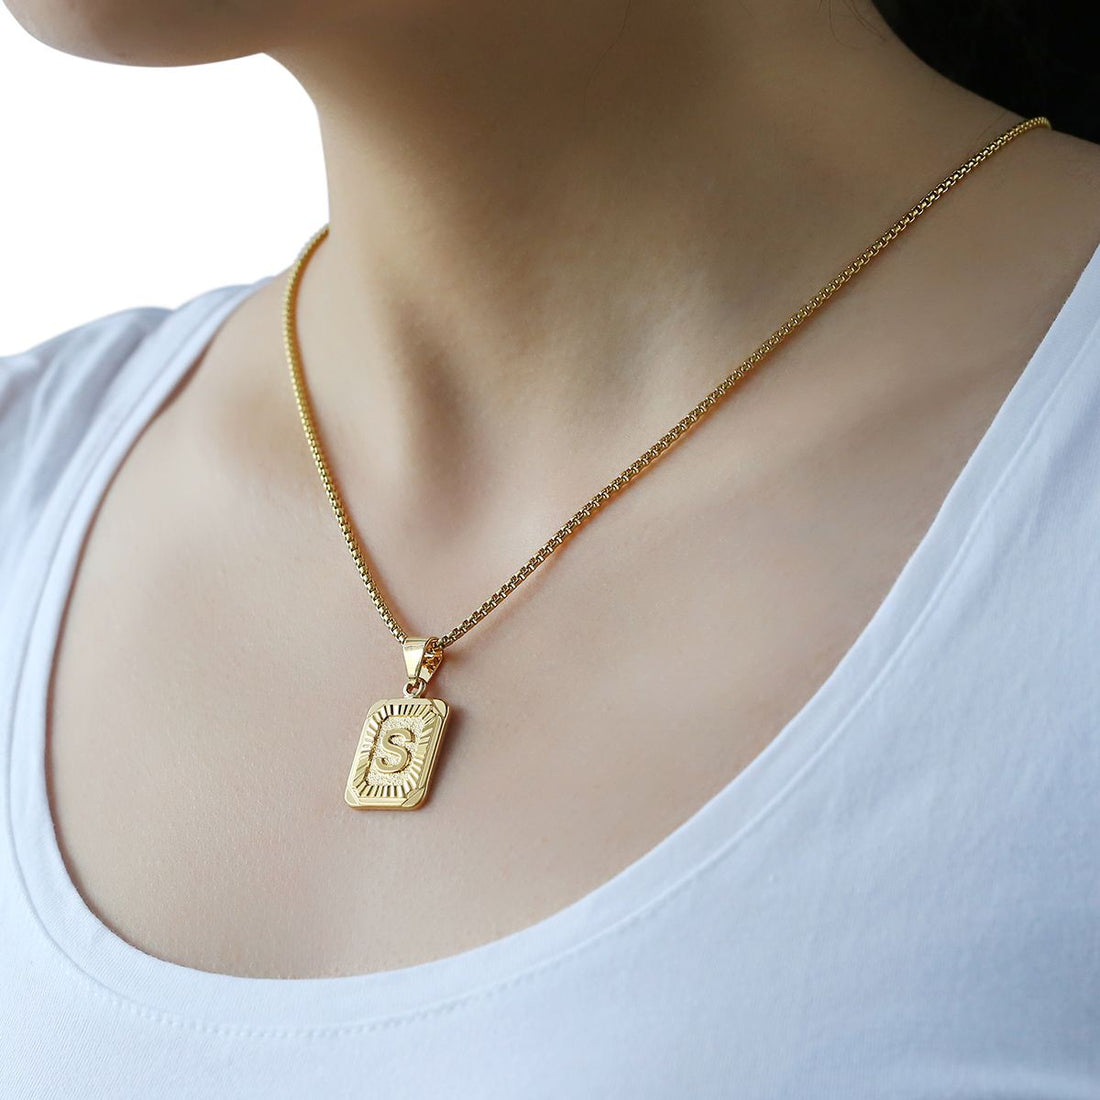 Boxy Letter Pendant Necklace - Darlings Jewelry | Express Yourself Through Bling!